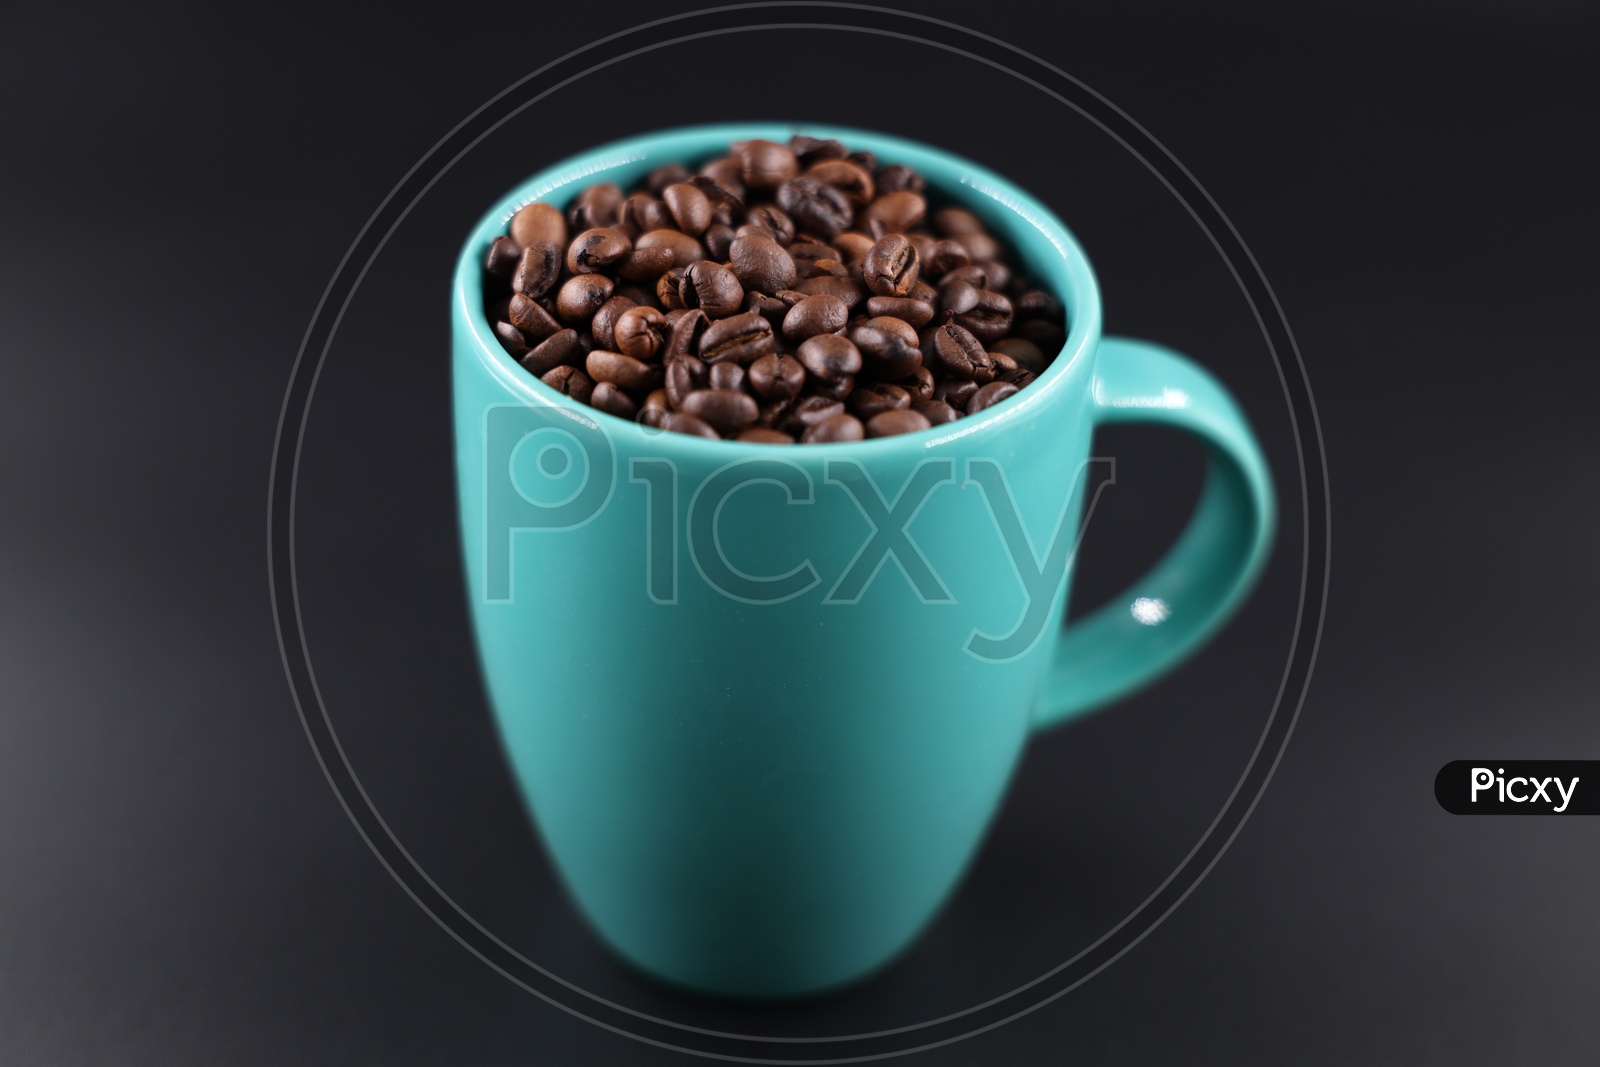 Coffee Beans In  Coffee Mug  Composition Shot On an Isolated Black Background